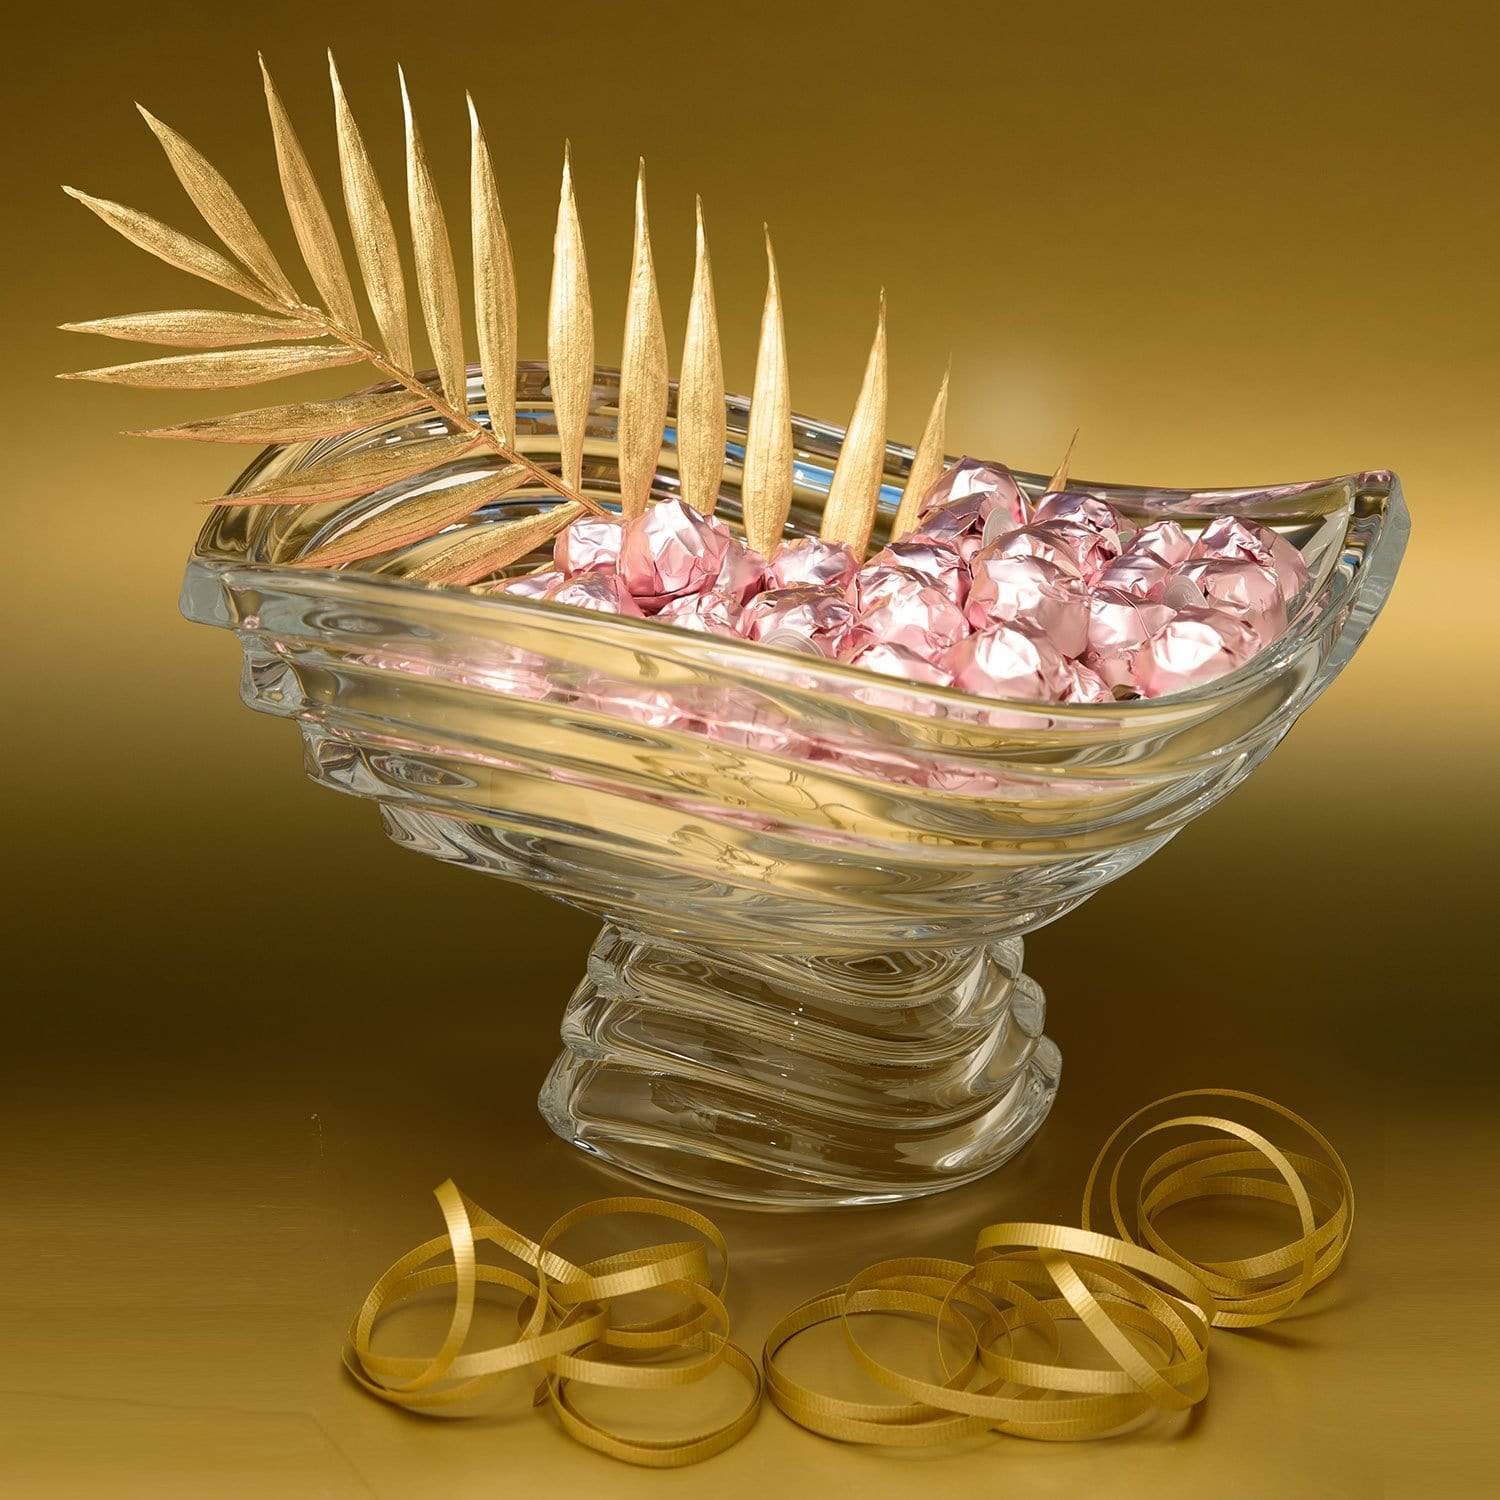 Bohemia Crystal Glass Wave Footed Bowl with 1kg Chocolate - 30.5 cm - 5391181 - Jashanmal Home